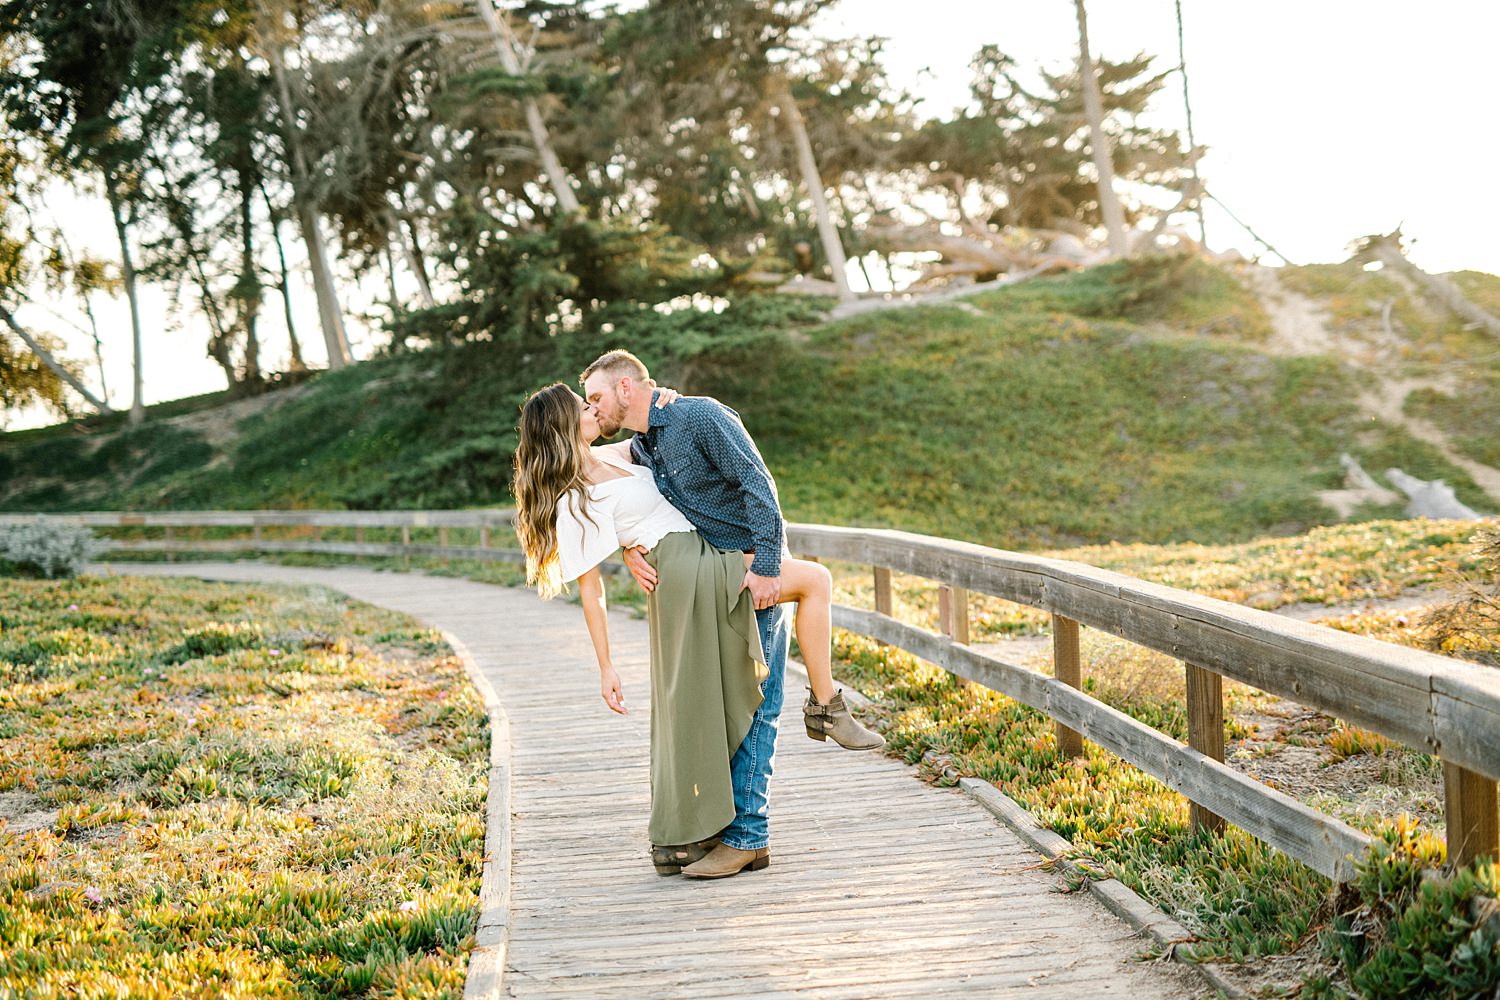 Groom dips his fiancé during beautiful sunset on Pismo Beach boardwalk by Pismo Beach engagement photographer Austyn Elizabeth Photography